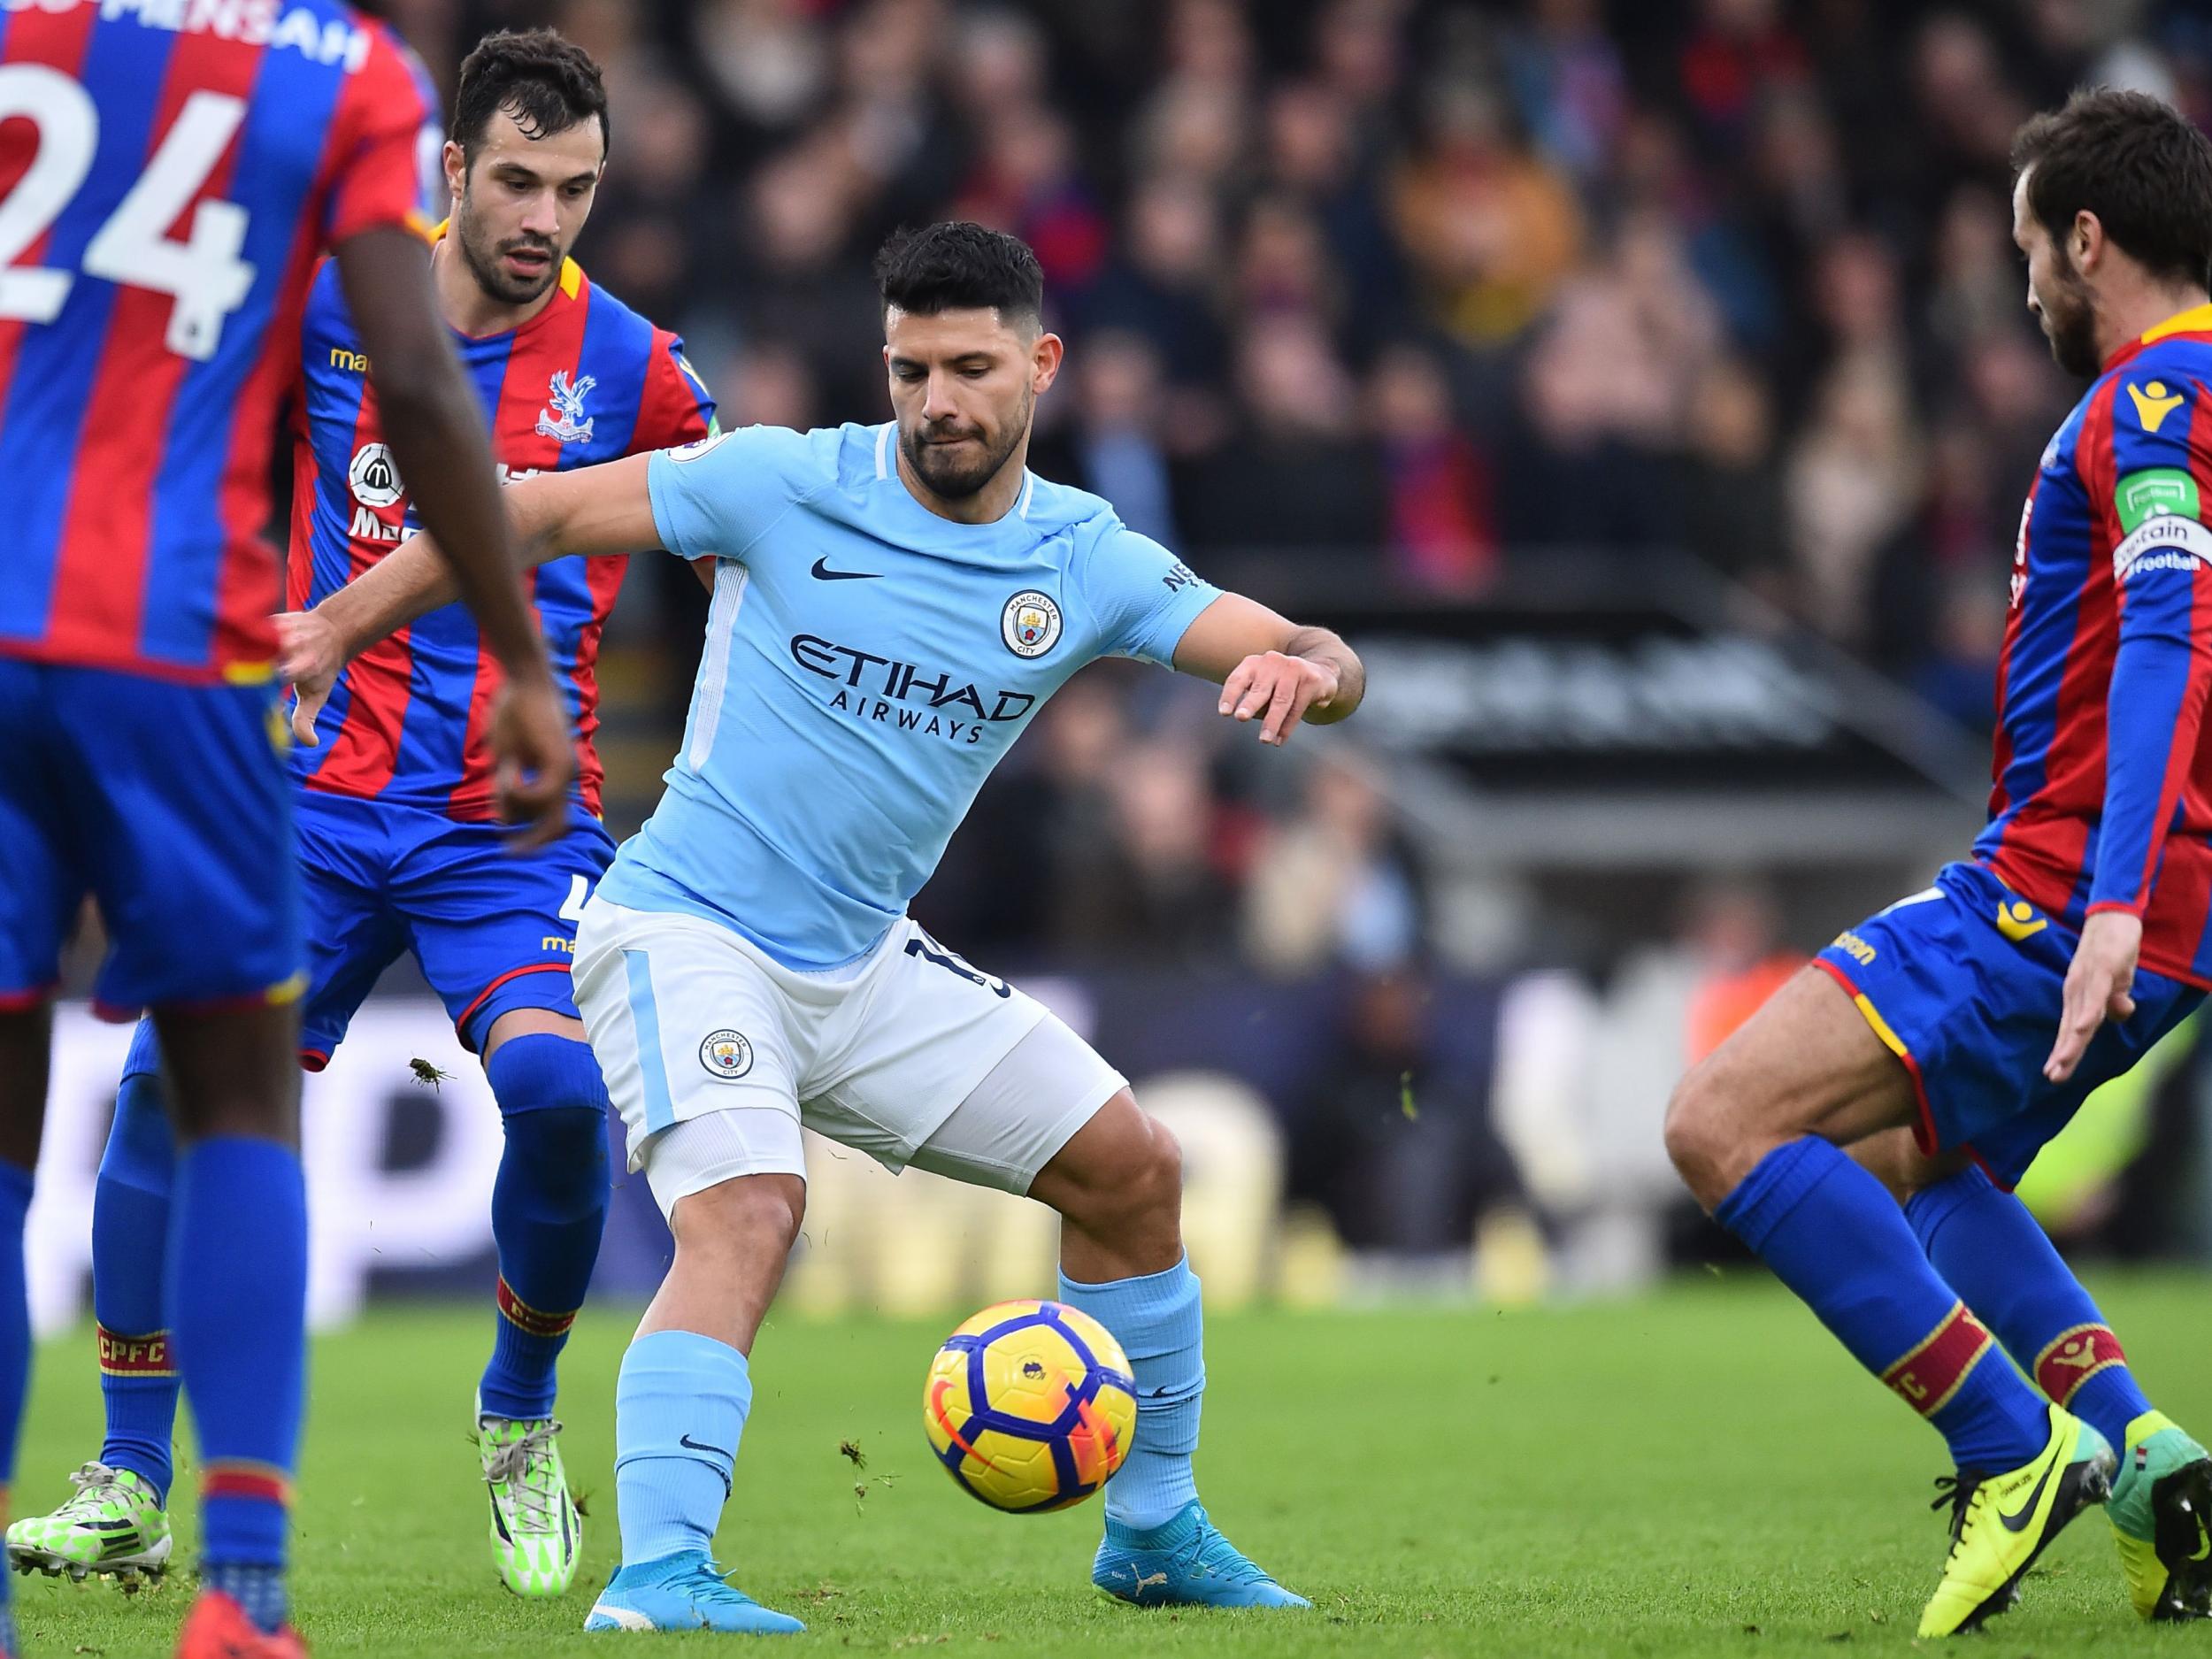 Crystal Palace defended brilliantly against the City attack